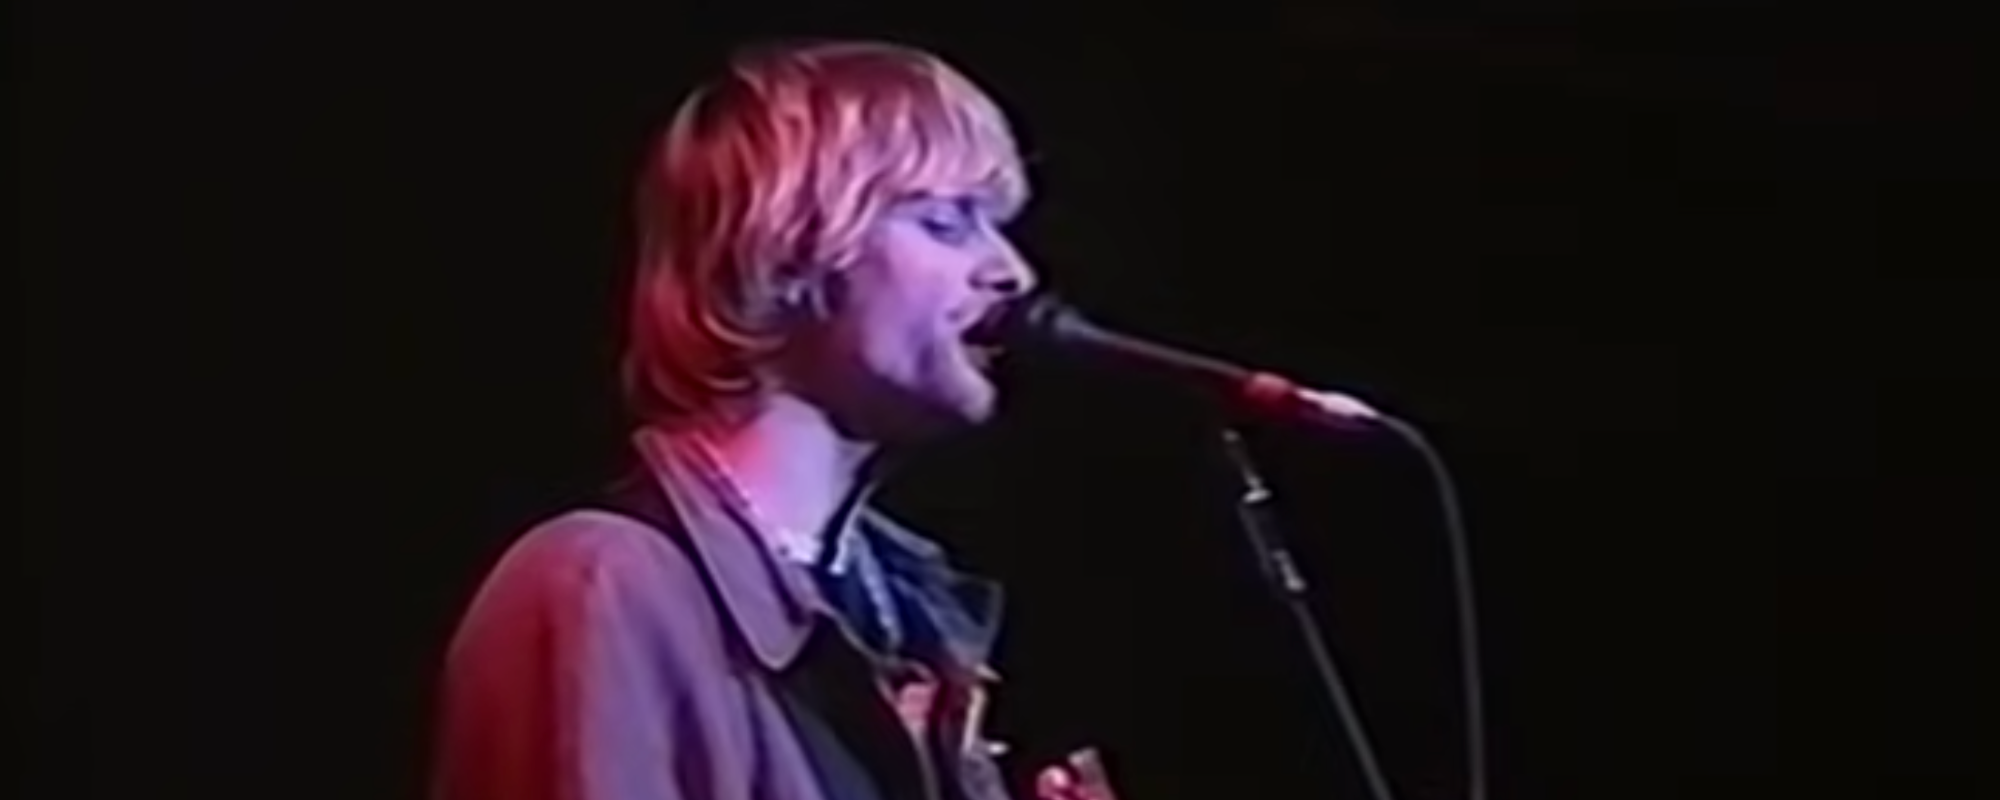 Remember When: Nirvana Sabotages Their Own Show to Stick Up for Their Friends